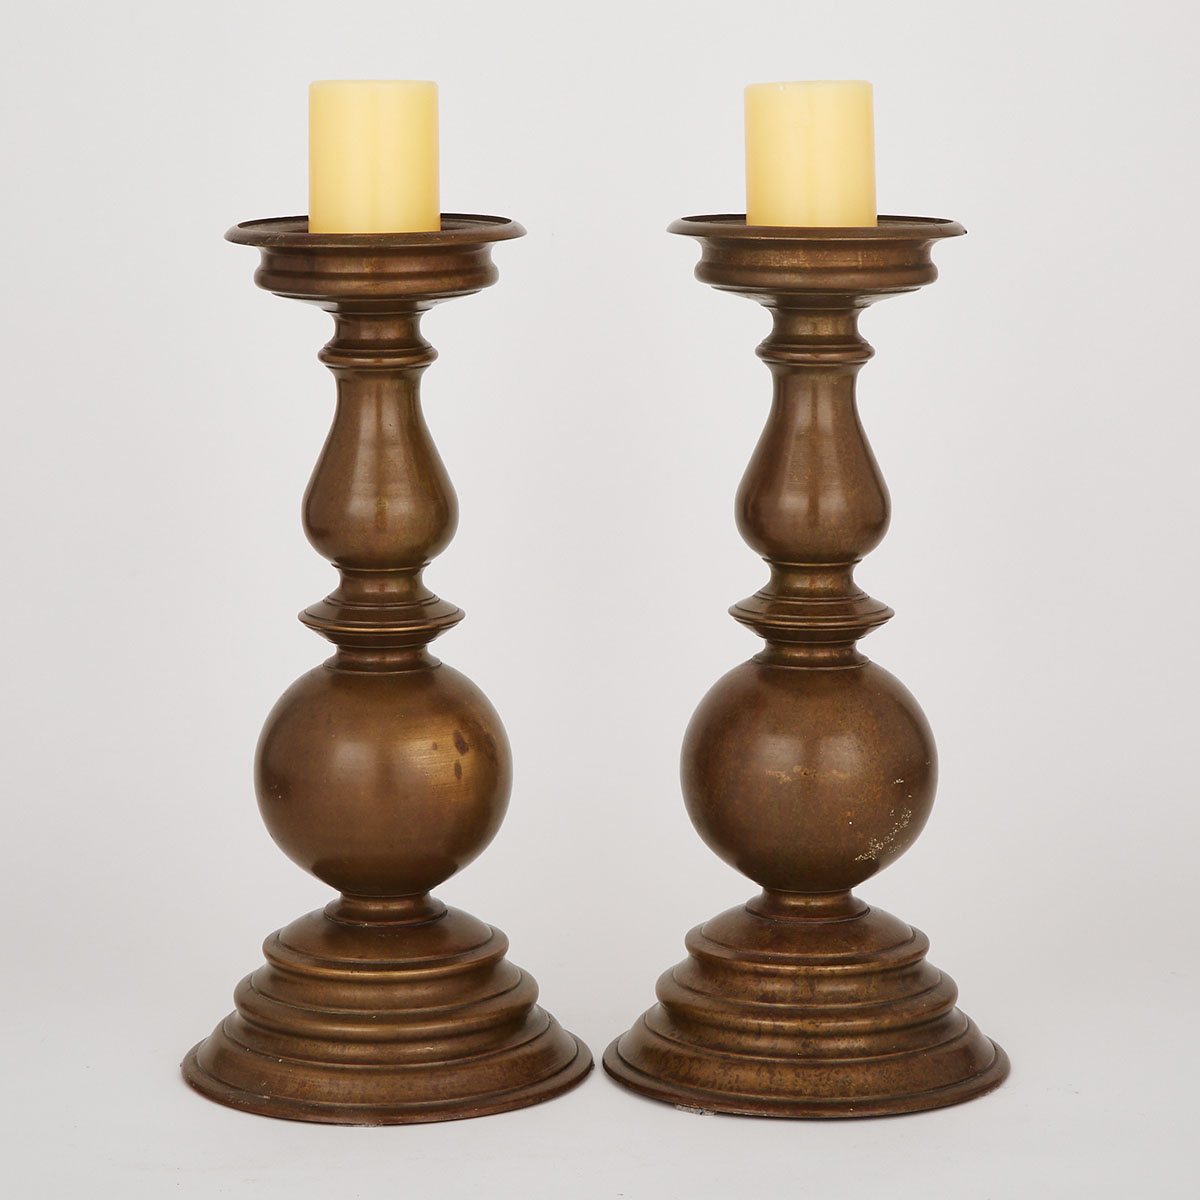 Pair of Baluster Form Patinated Bronze Candle Prickets, early-mid 20th century